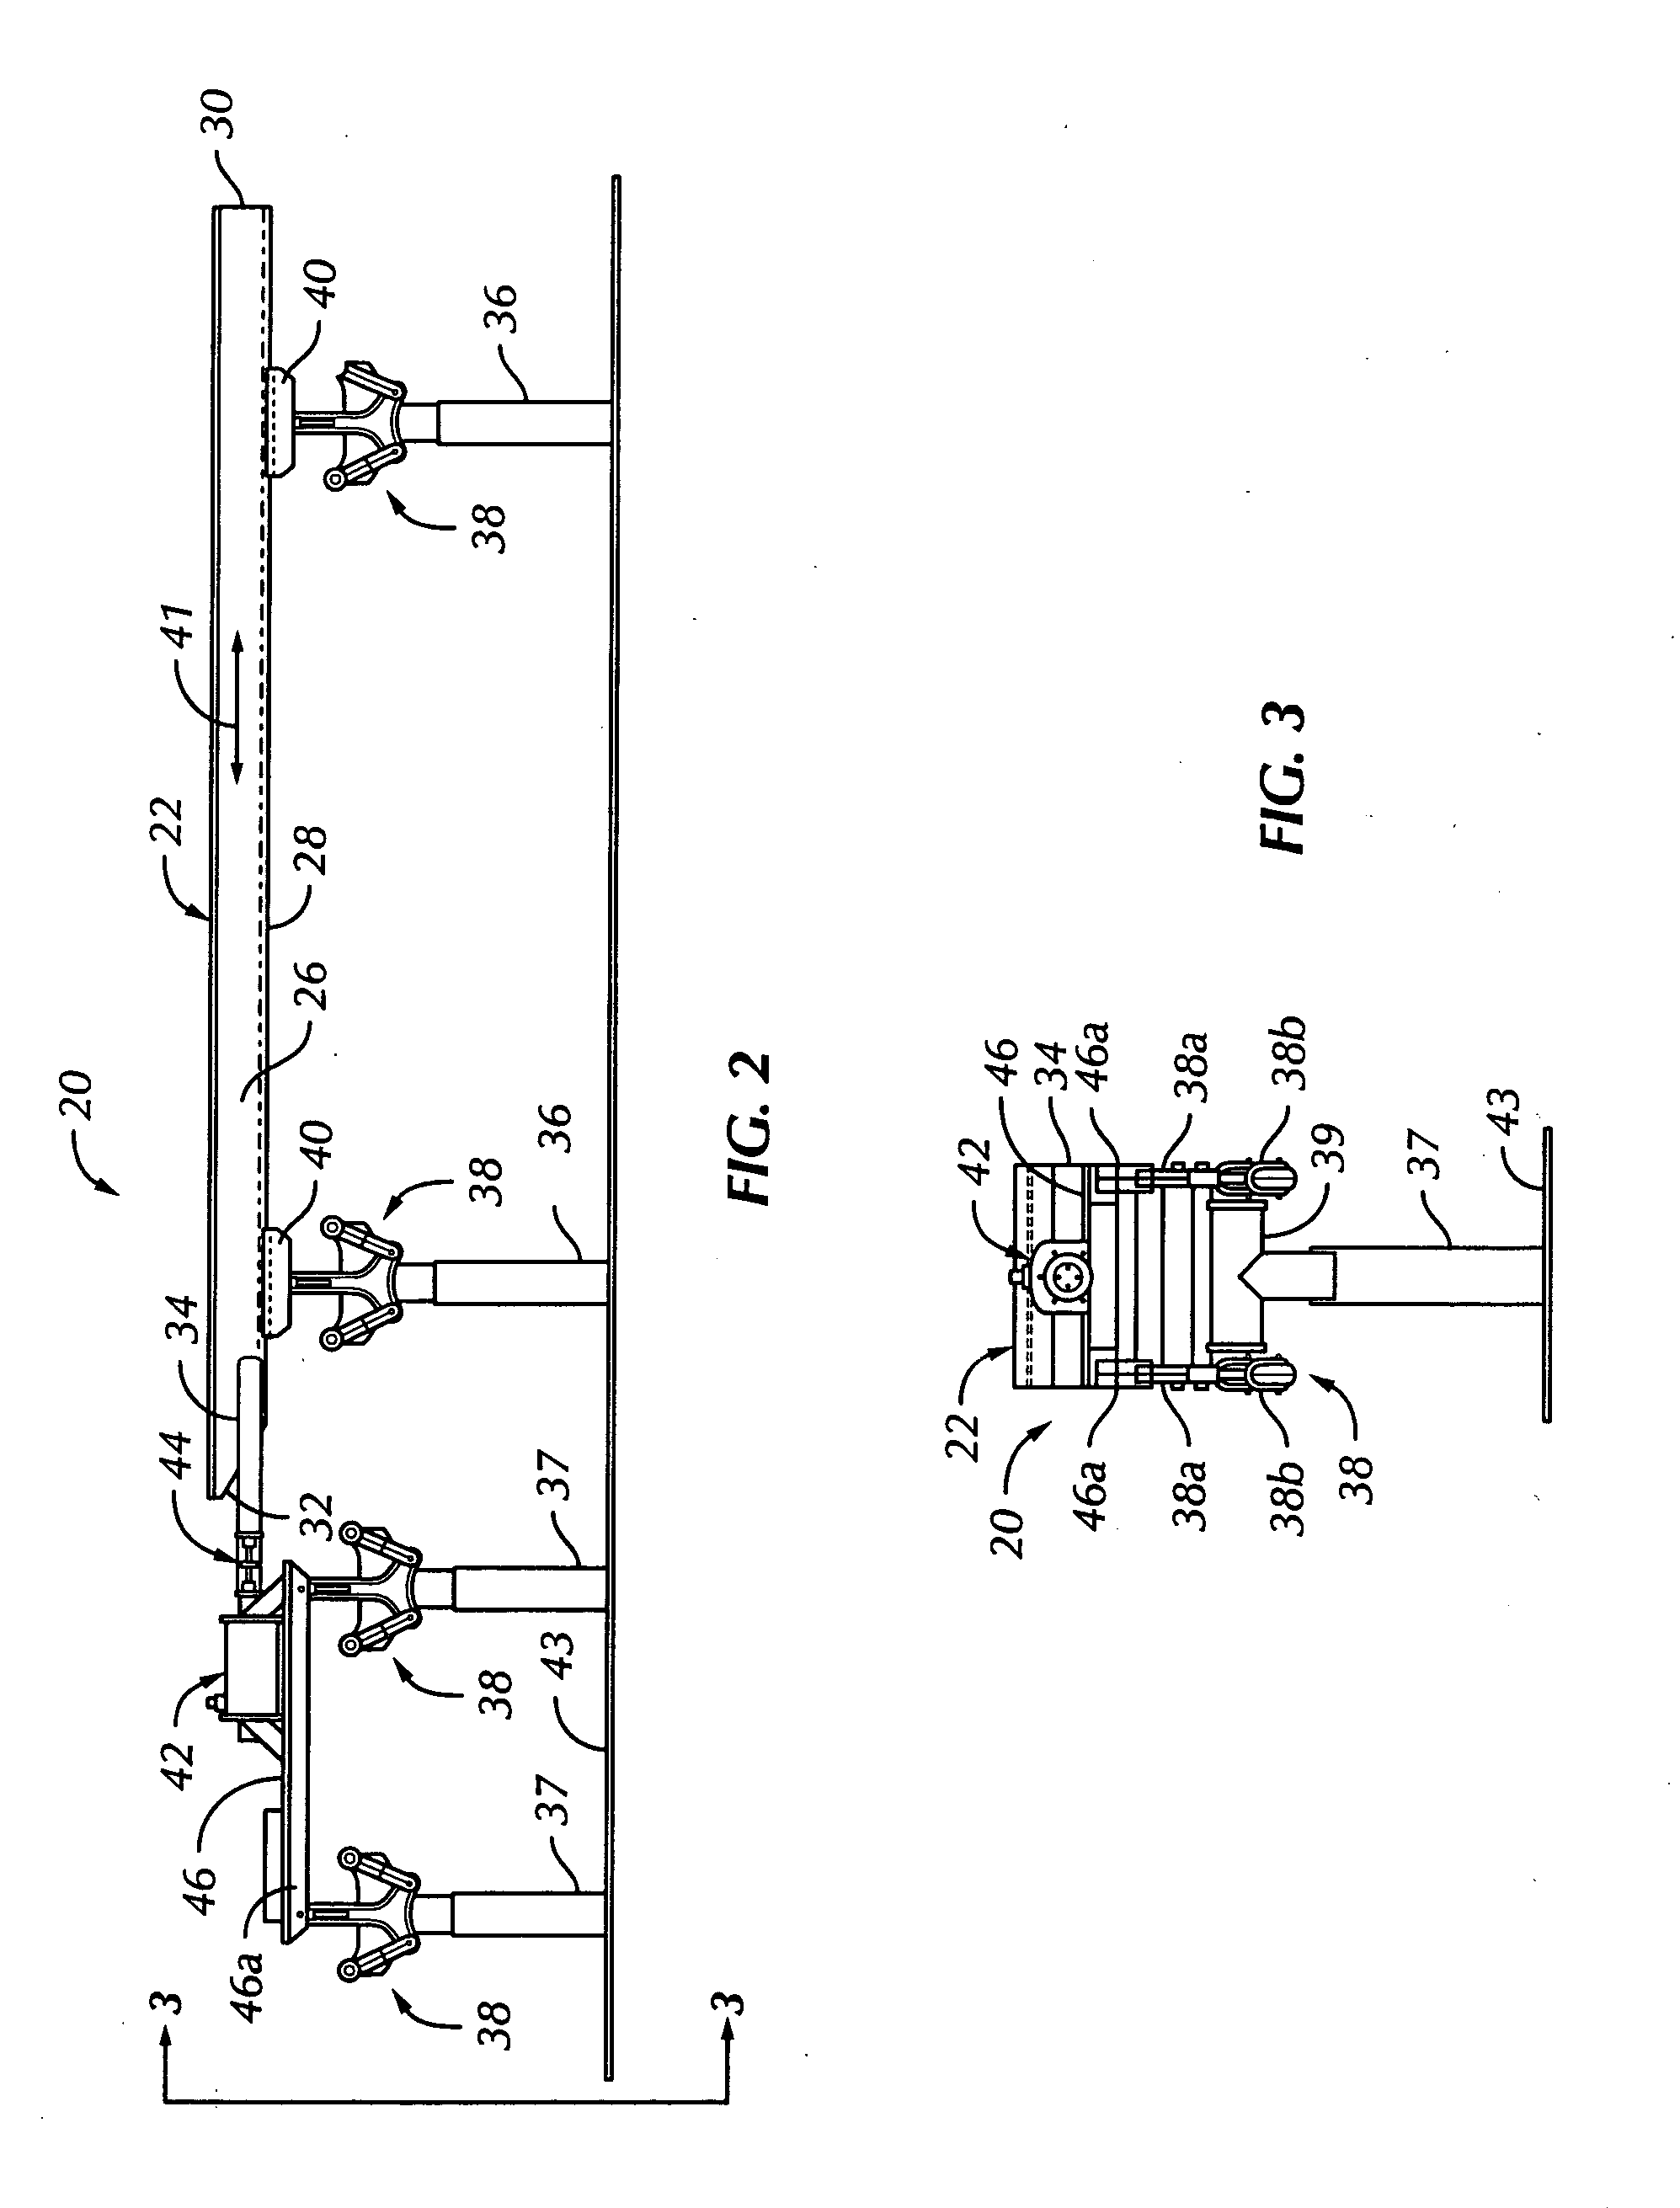 Reciprocating conveyor system and method